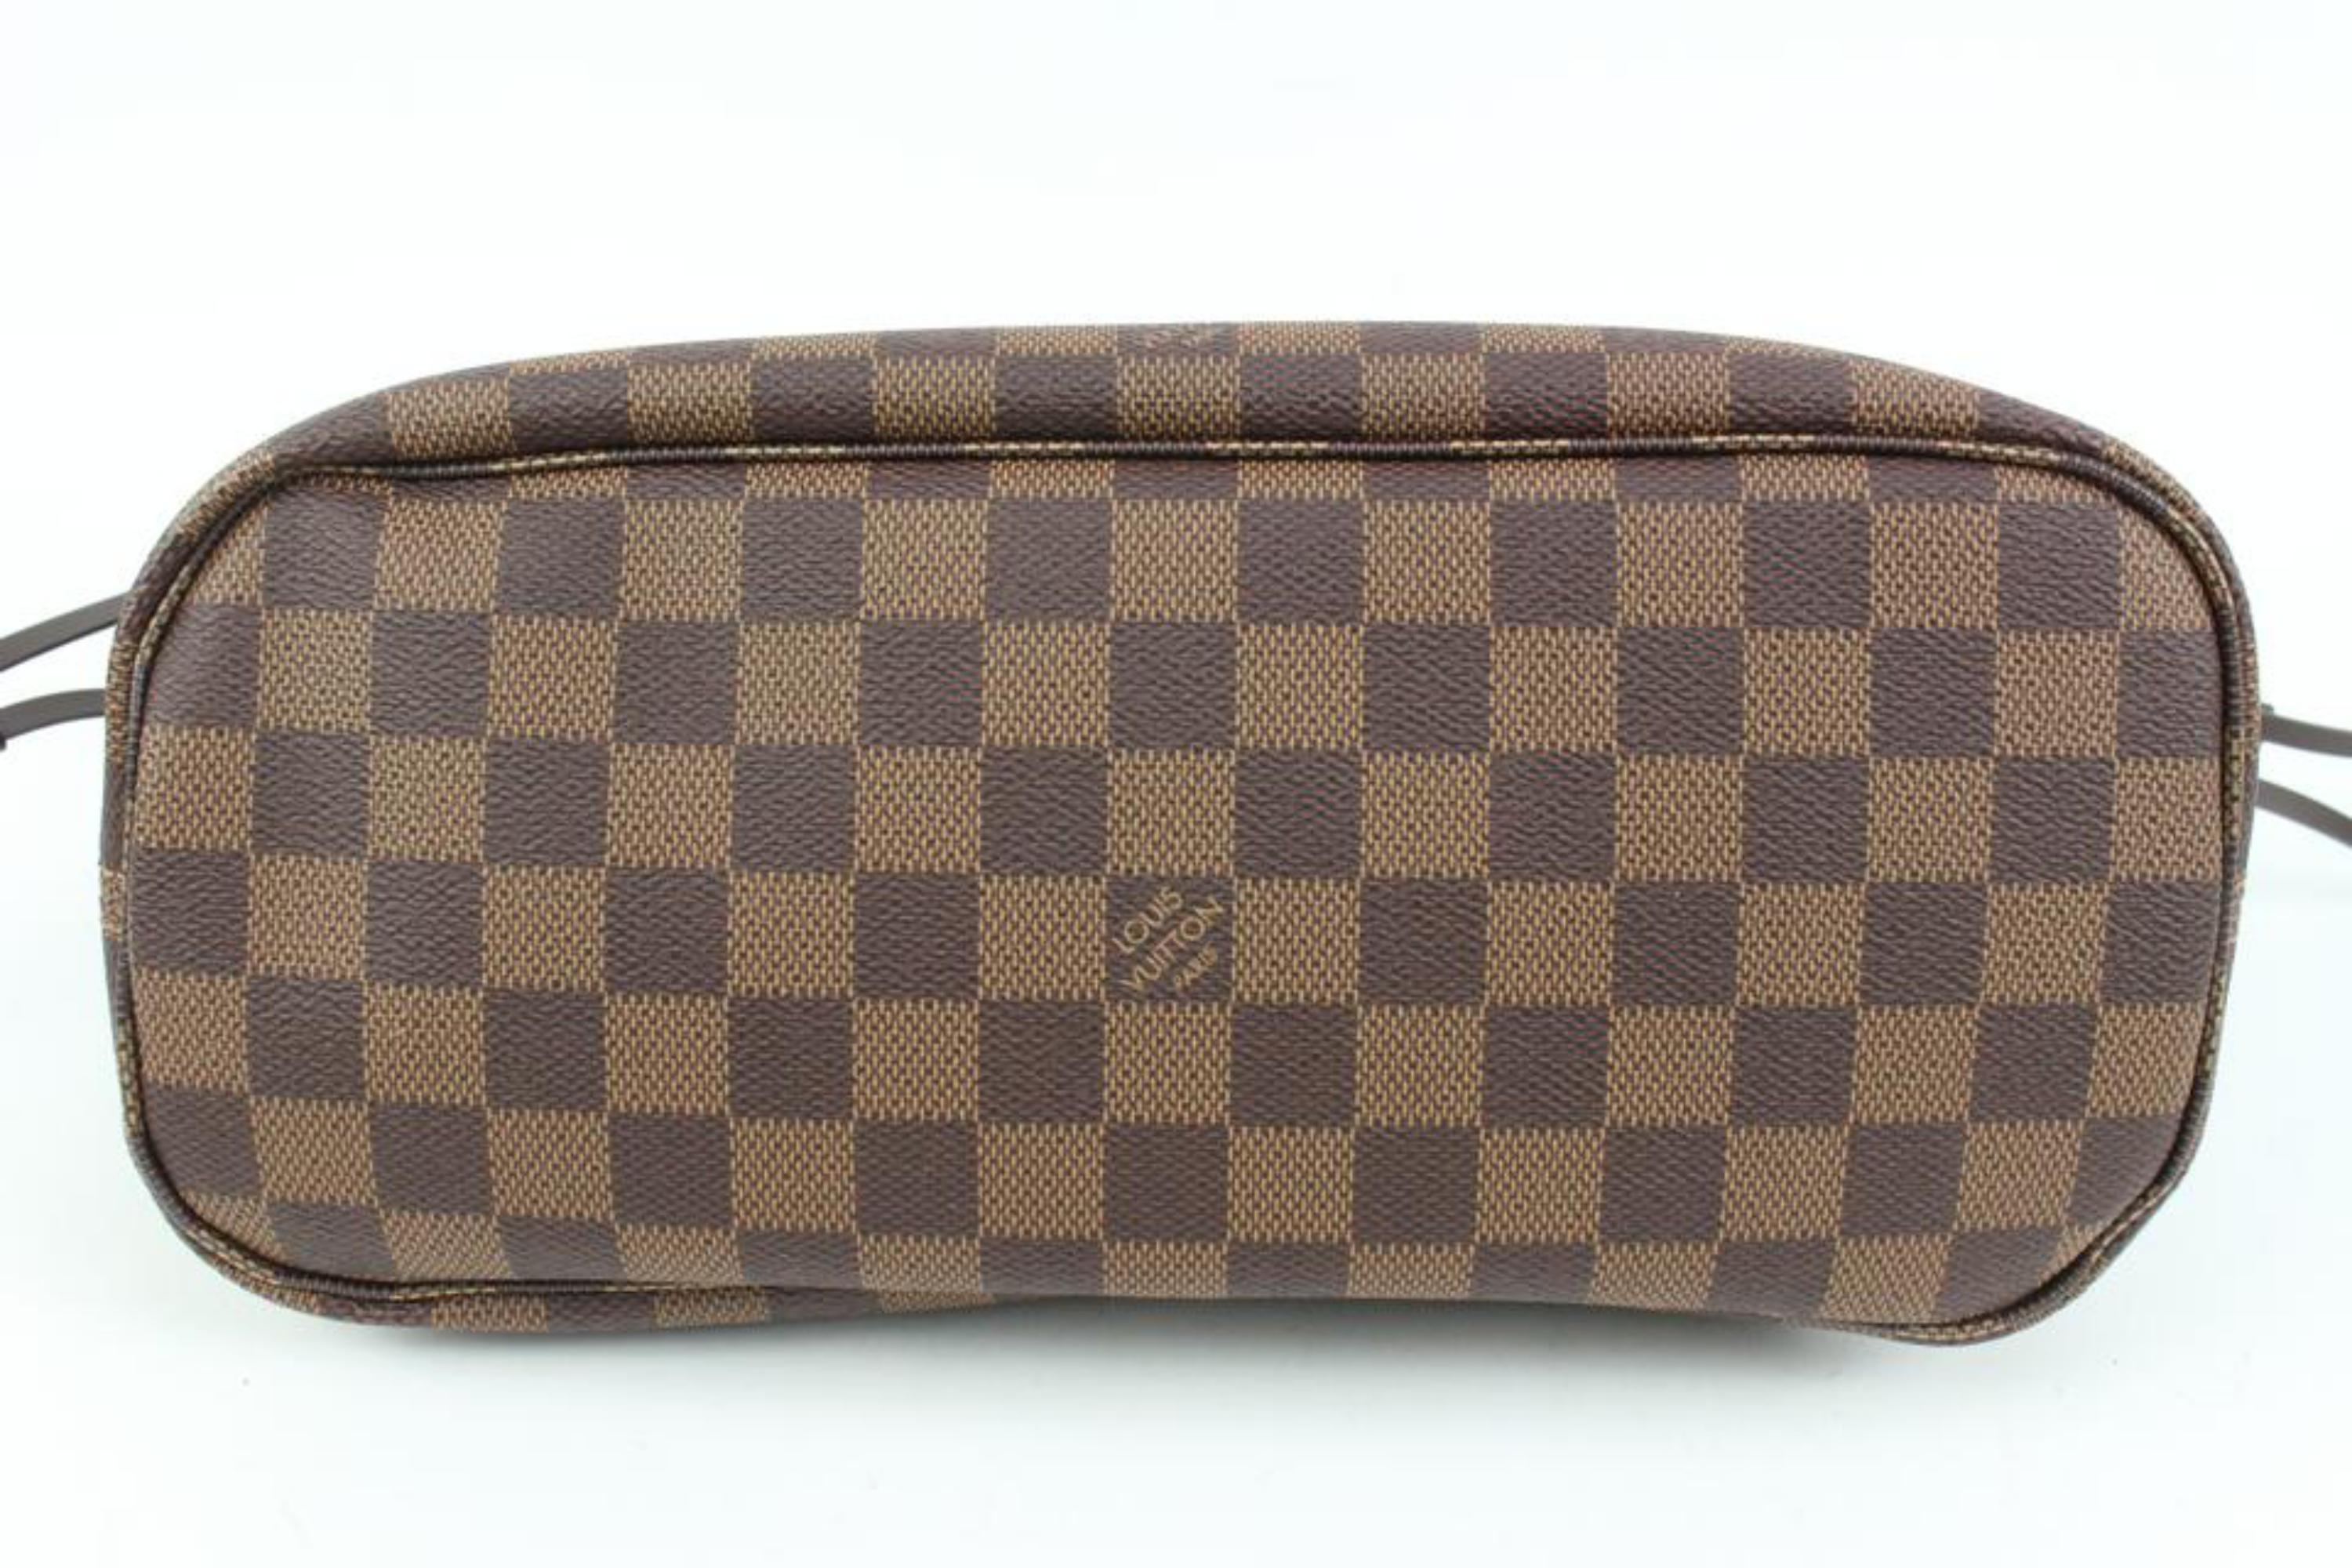 Louis Vuitton Small Damier Ebene Neverfull PM Tote Bag 44lk82 For Sale 3